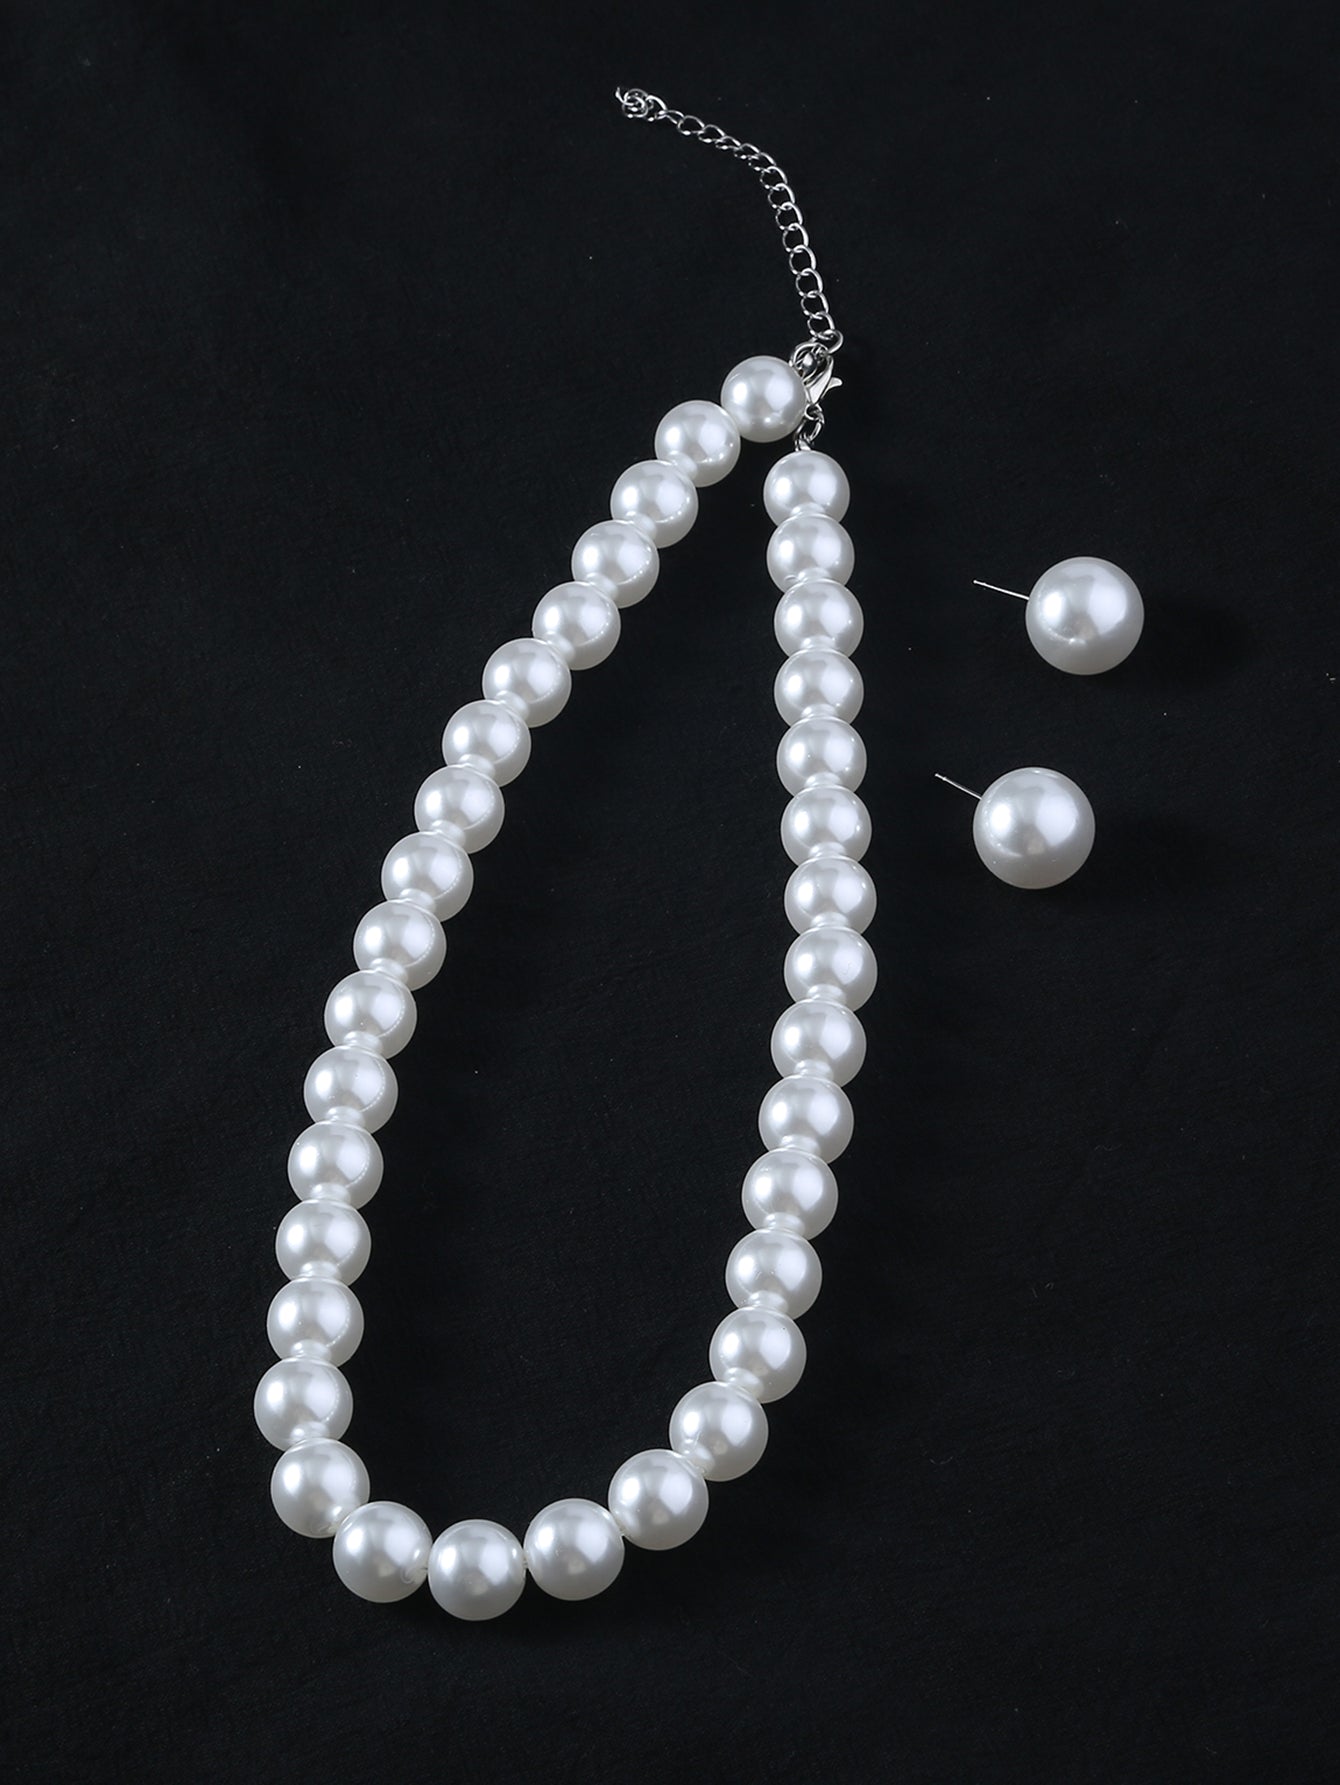 Bridal Sweet Round Artificial Pearl Beaded Three-dimensional Women's Earrings Necklace